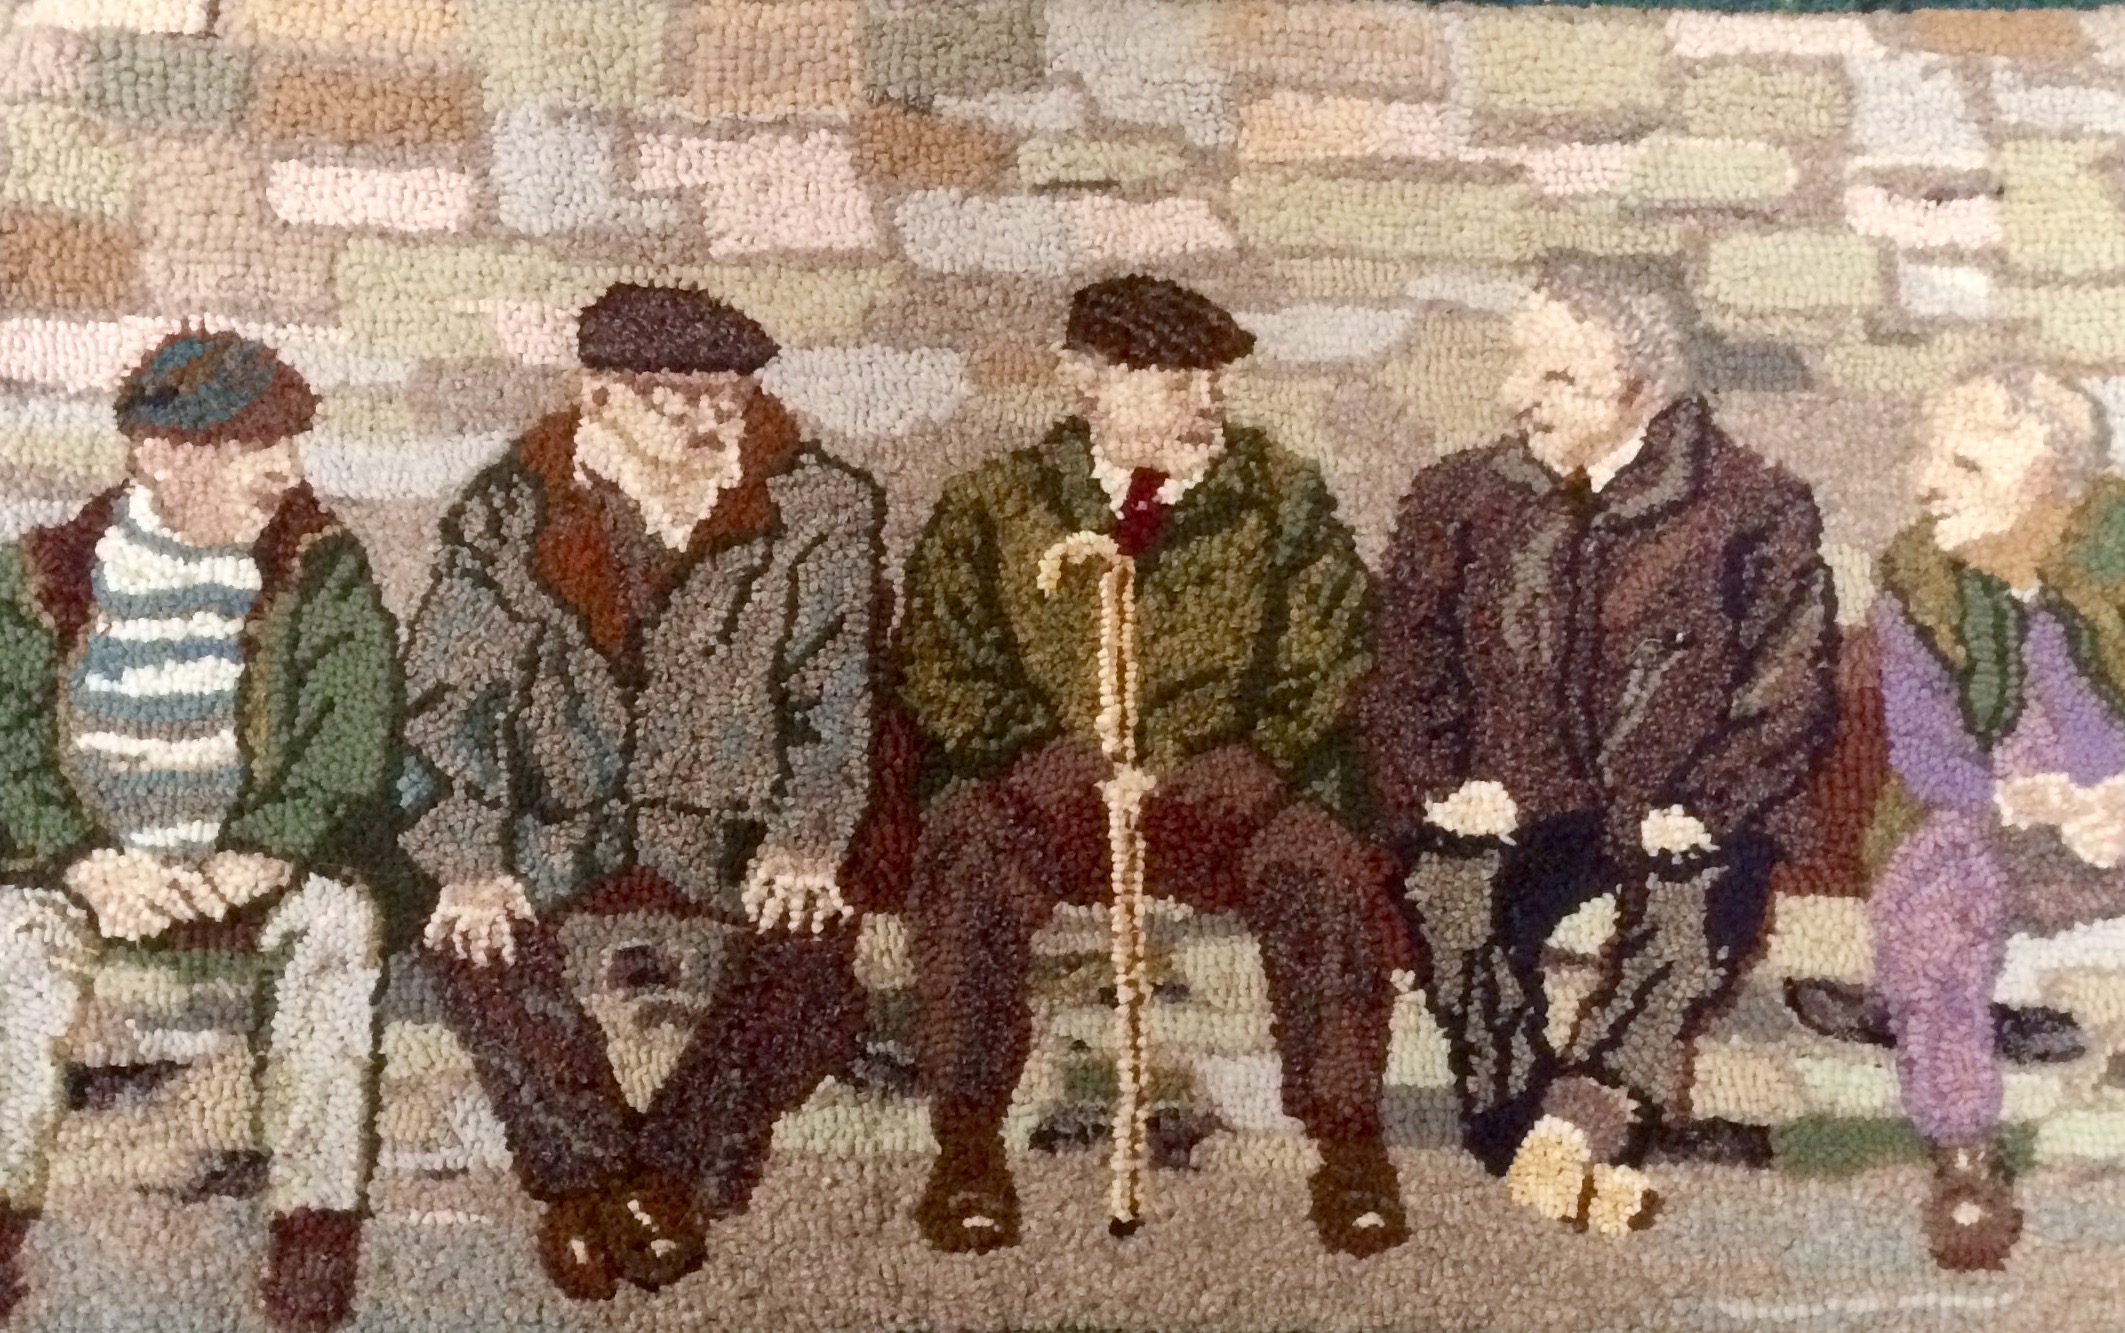 Men on a Bench Heather Ritchie BBC 4 Make rag rugging woman recycled artwork